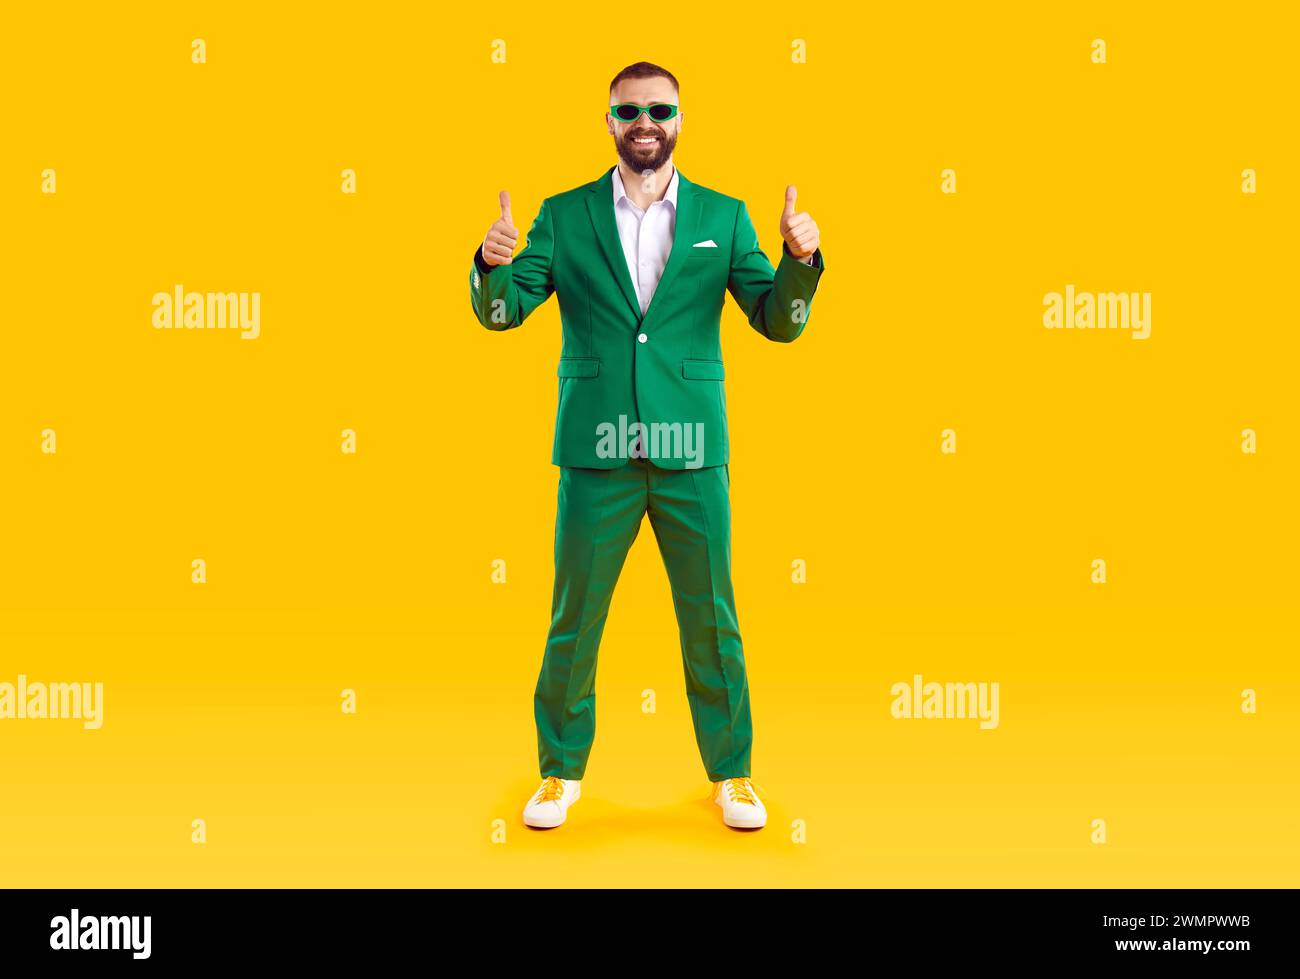 Happy man in green suit standing on yellow background, showing thumbs up and smiling Stock Photo